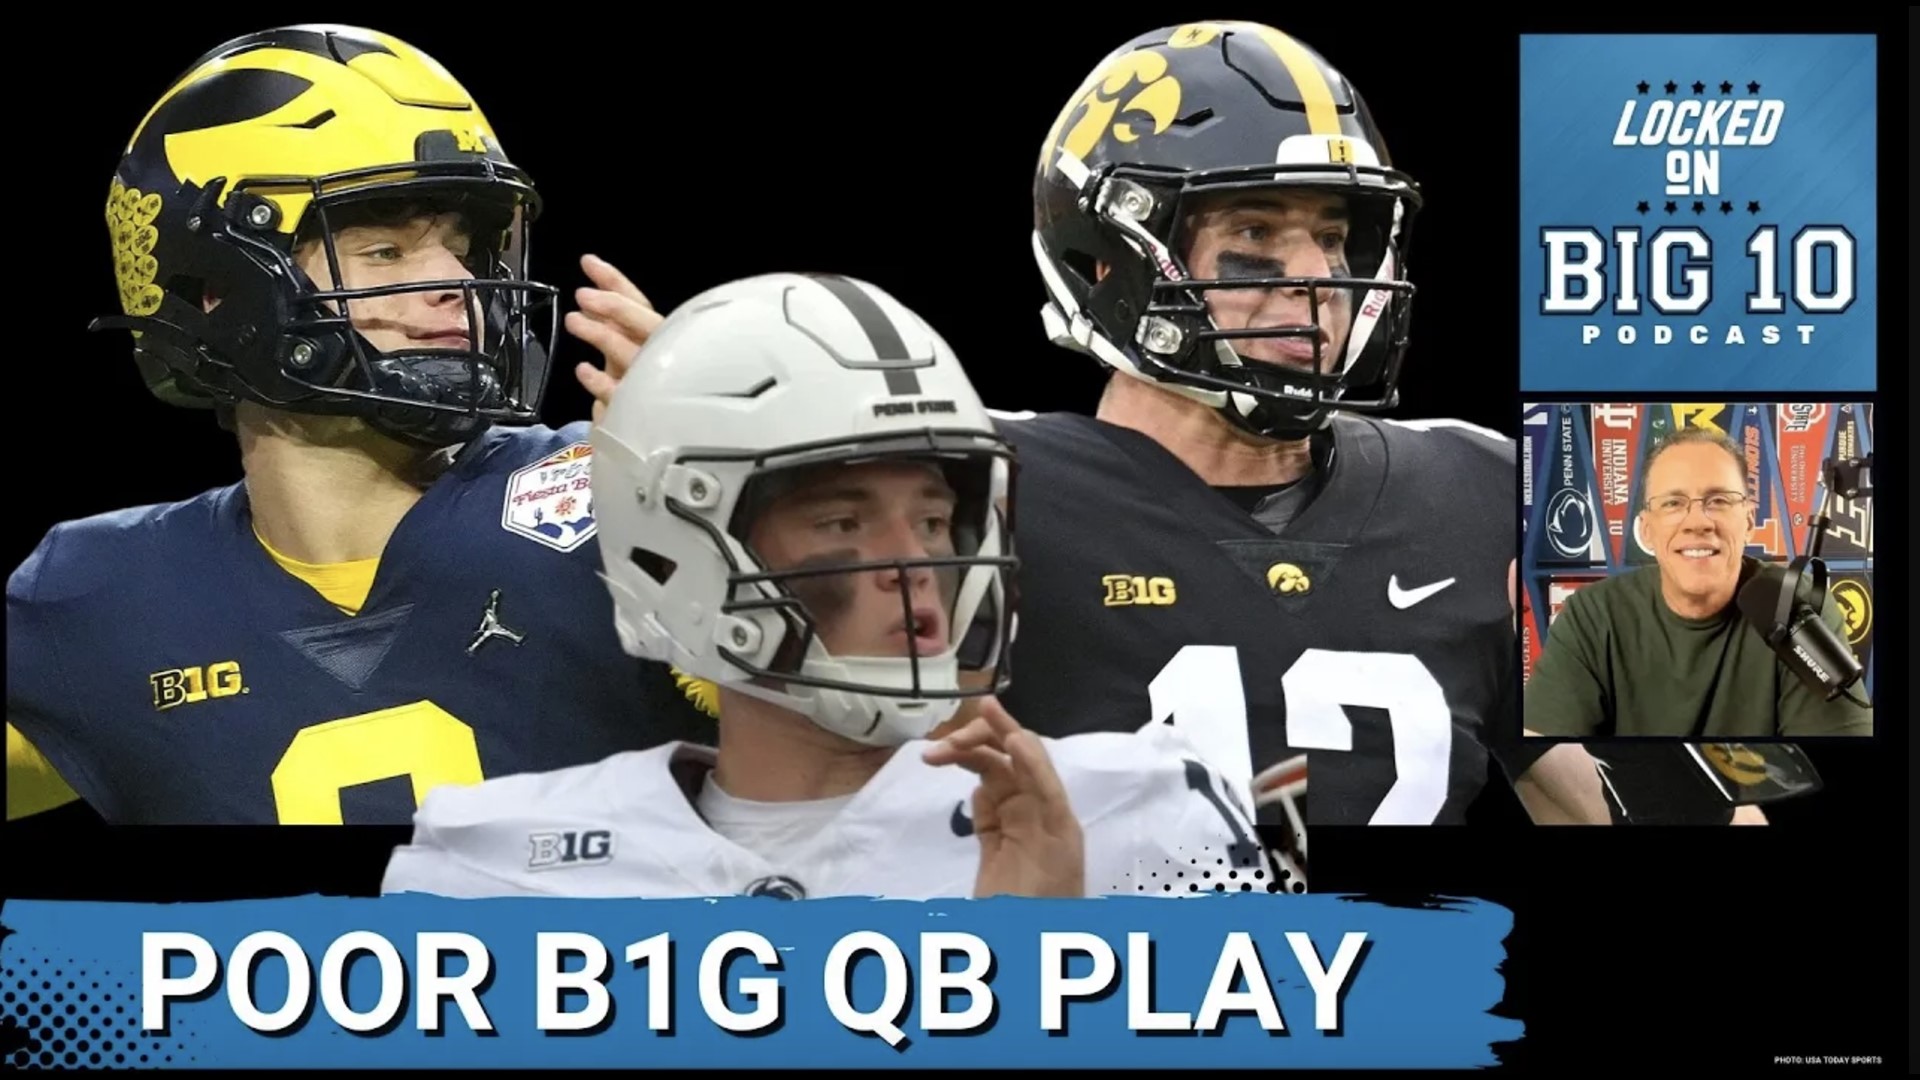 Half of the Big 10 quarterbacks played their worst games of the season this weekend. Finally, we cap things off with our Top 10 Big 10 observations